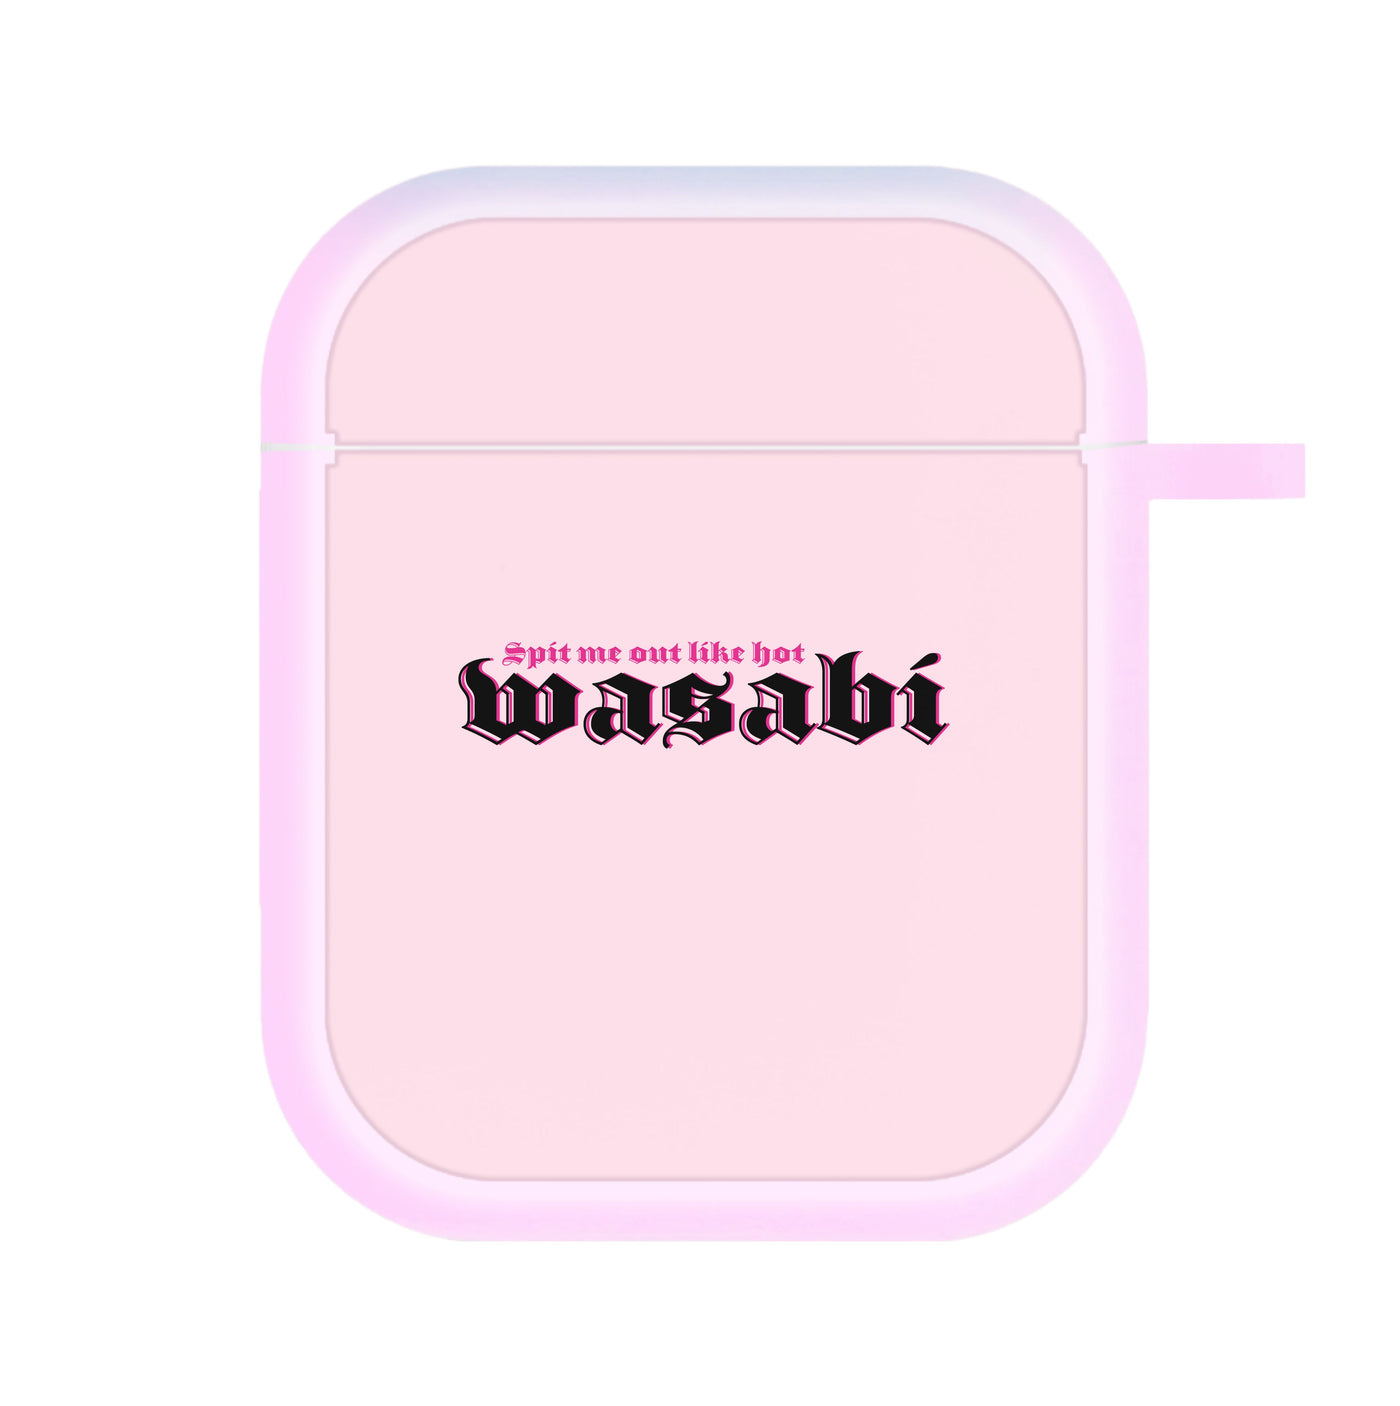 Wasabi Quote - Little Mix AirPods Case